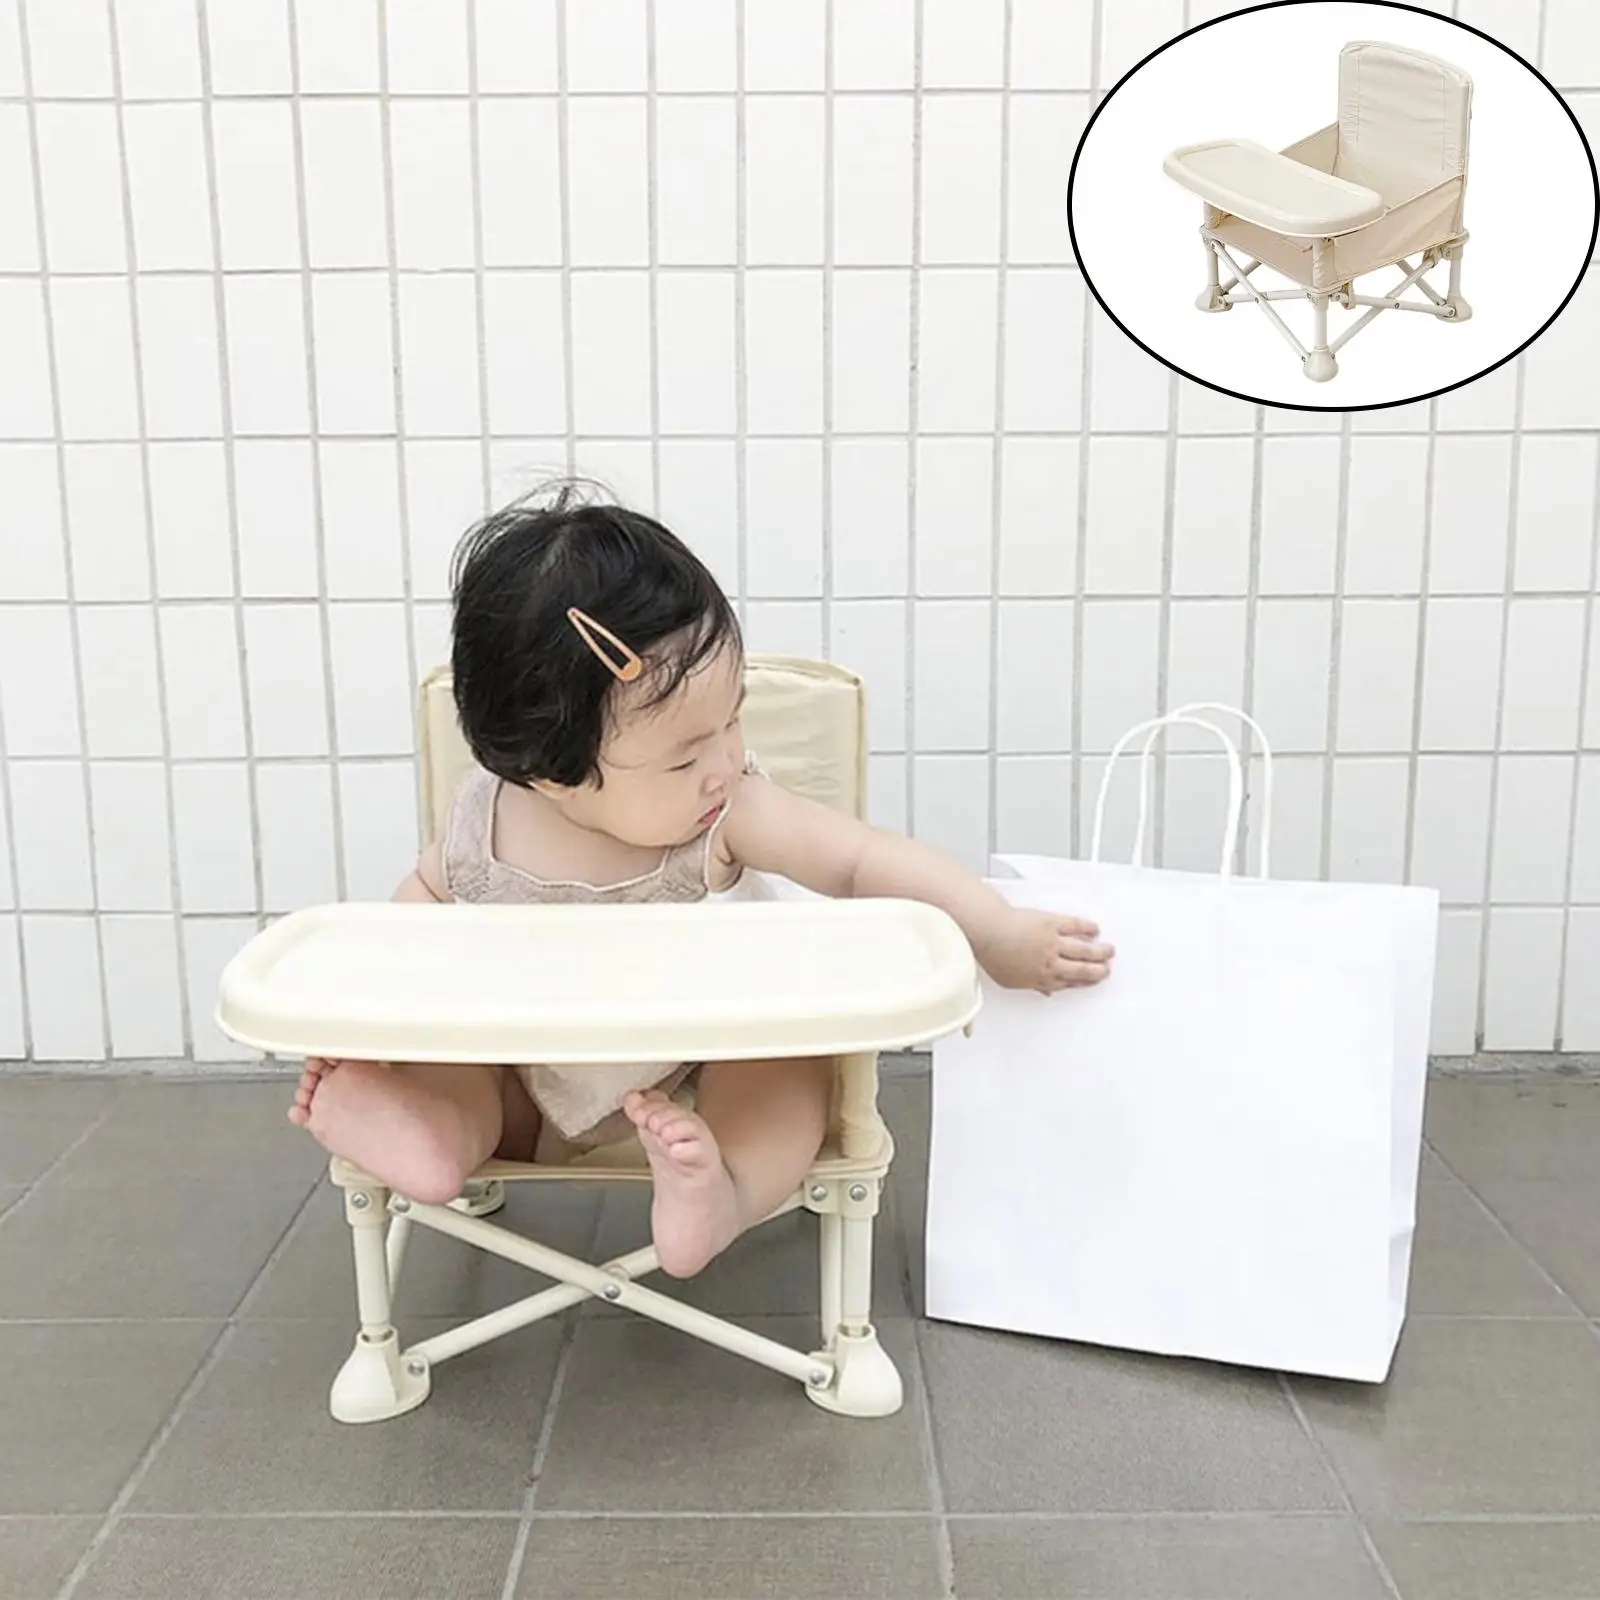 Kids Dining Table Chair Multi-purpose Babies Outdoor Eating Desk Seat Gadget